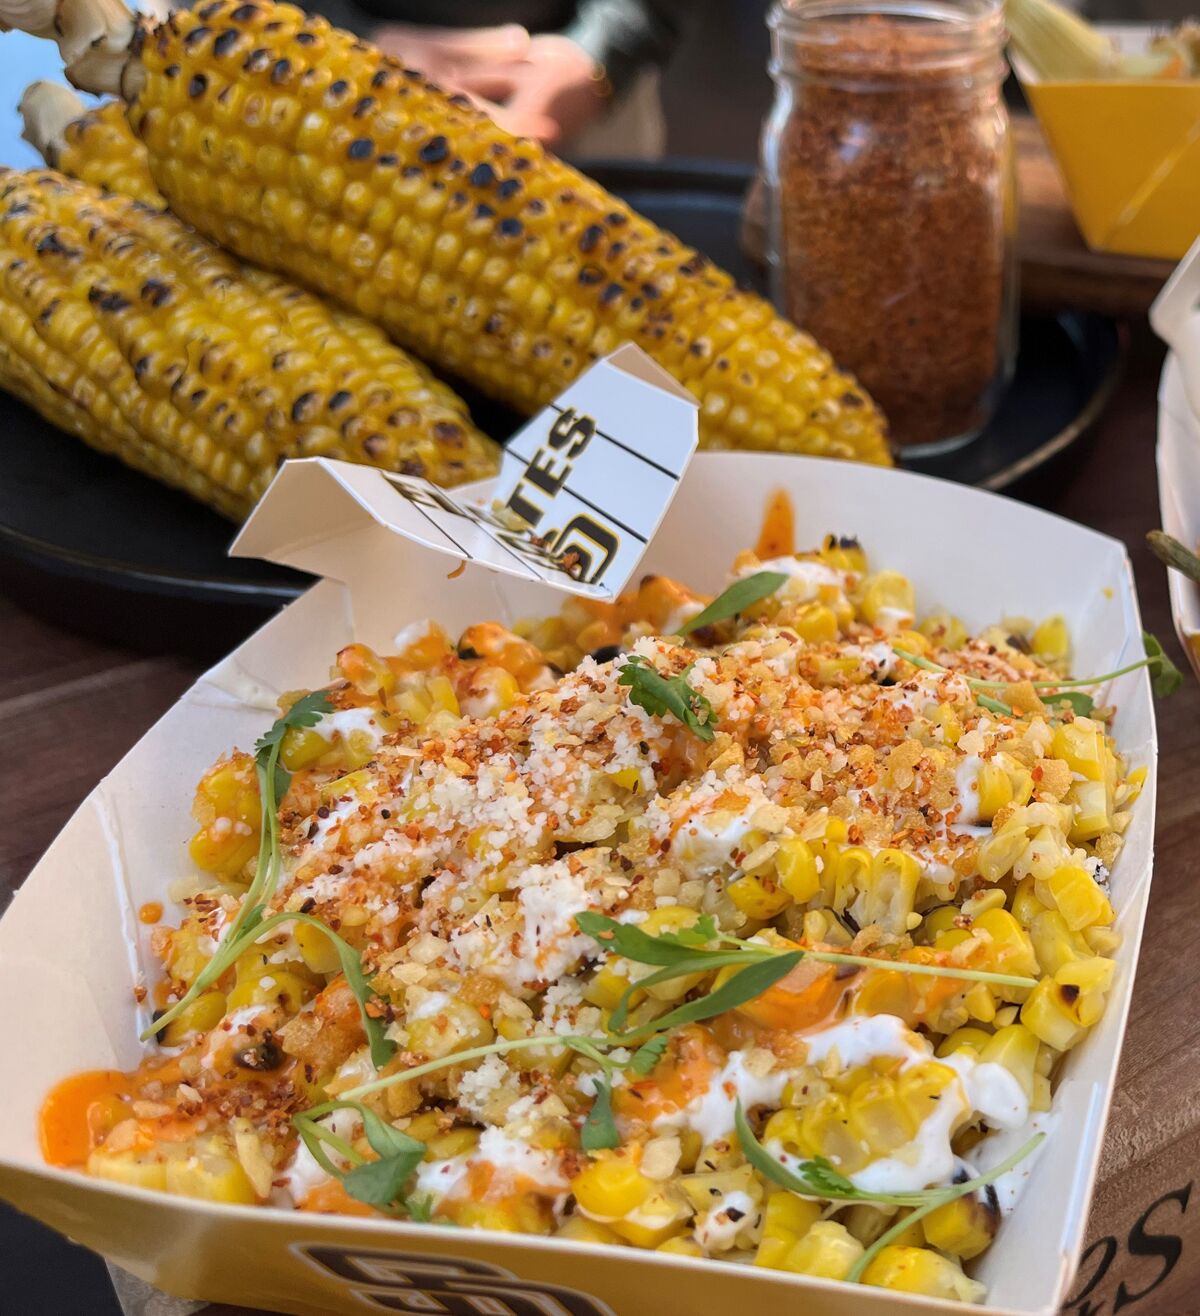 Elote Especial at the Mexican Street Corn stand at Petco Park.  